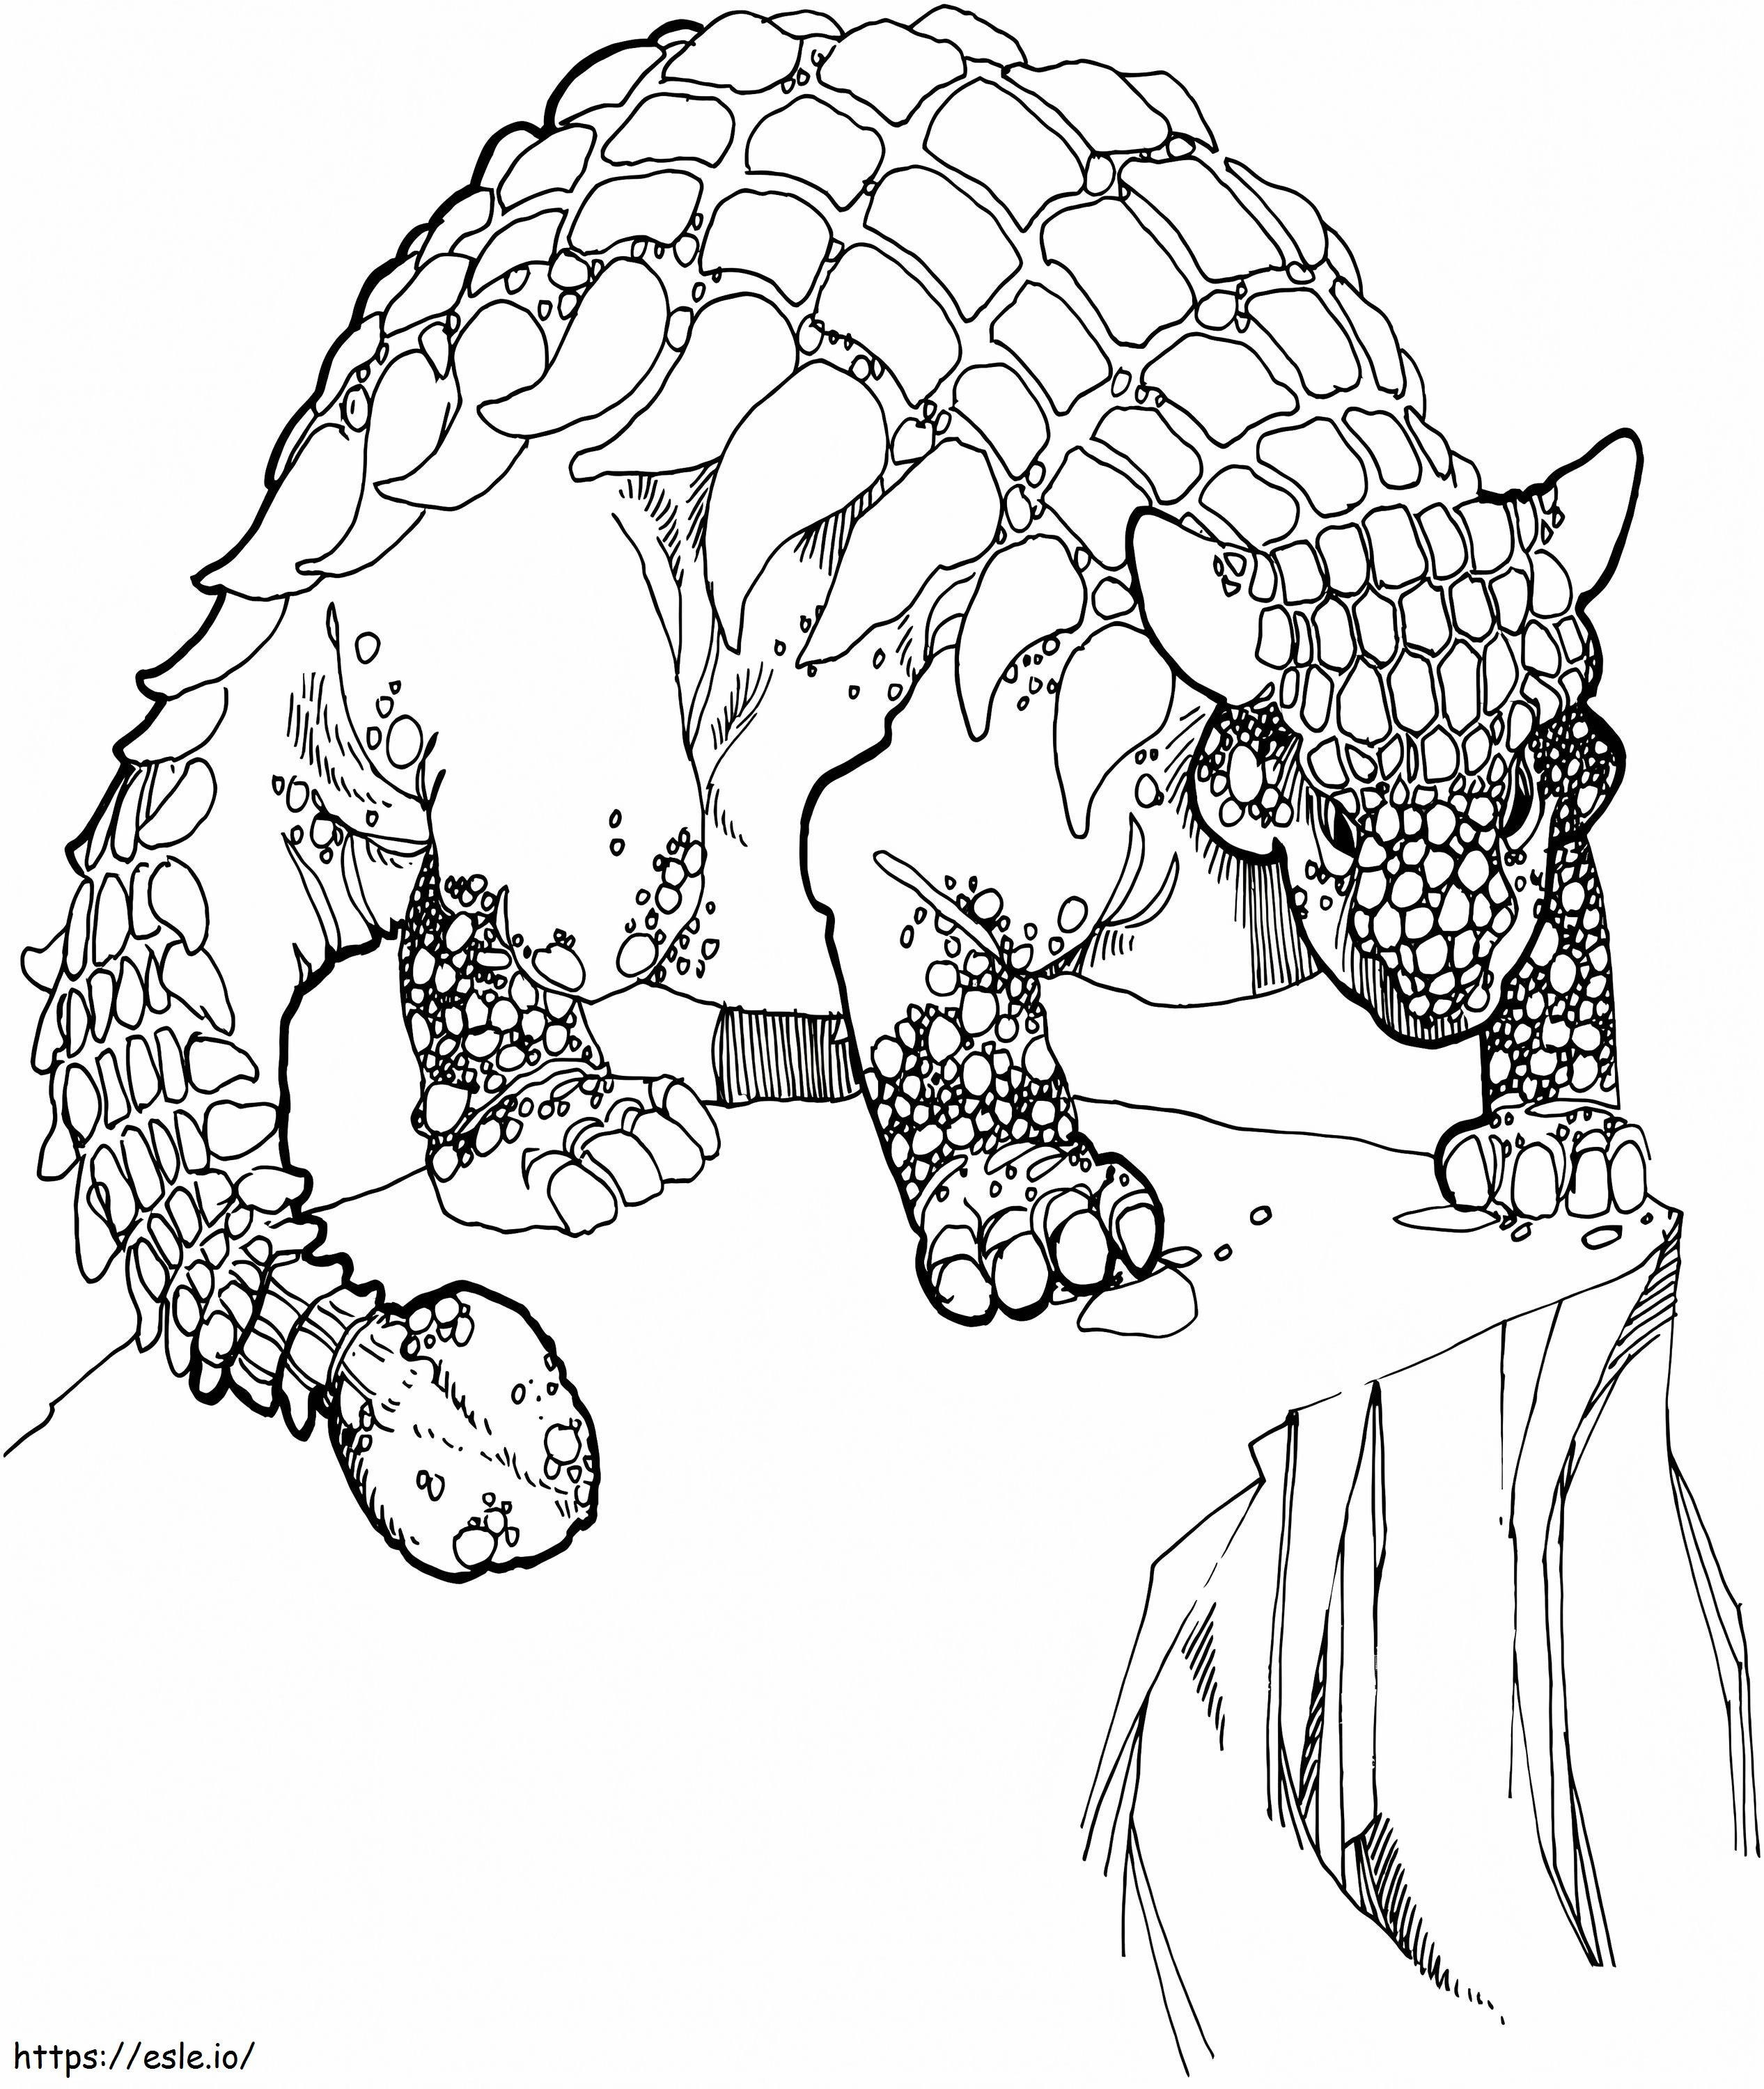 Ankylosaure coloring page